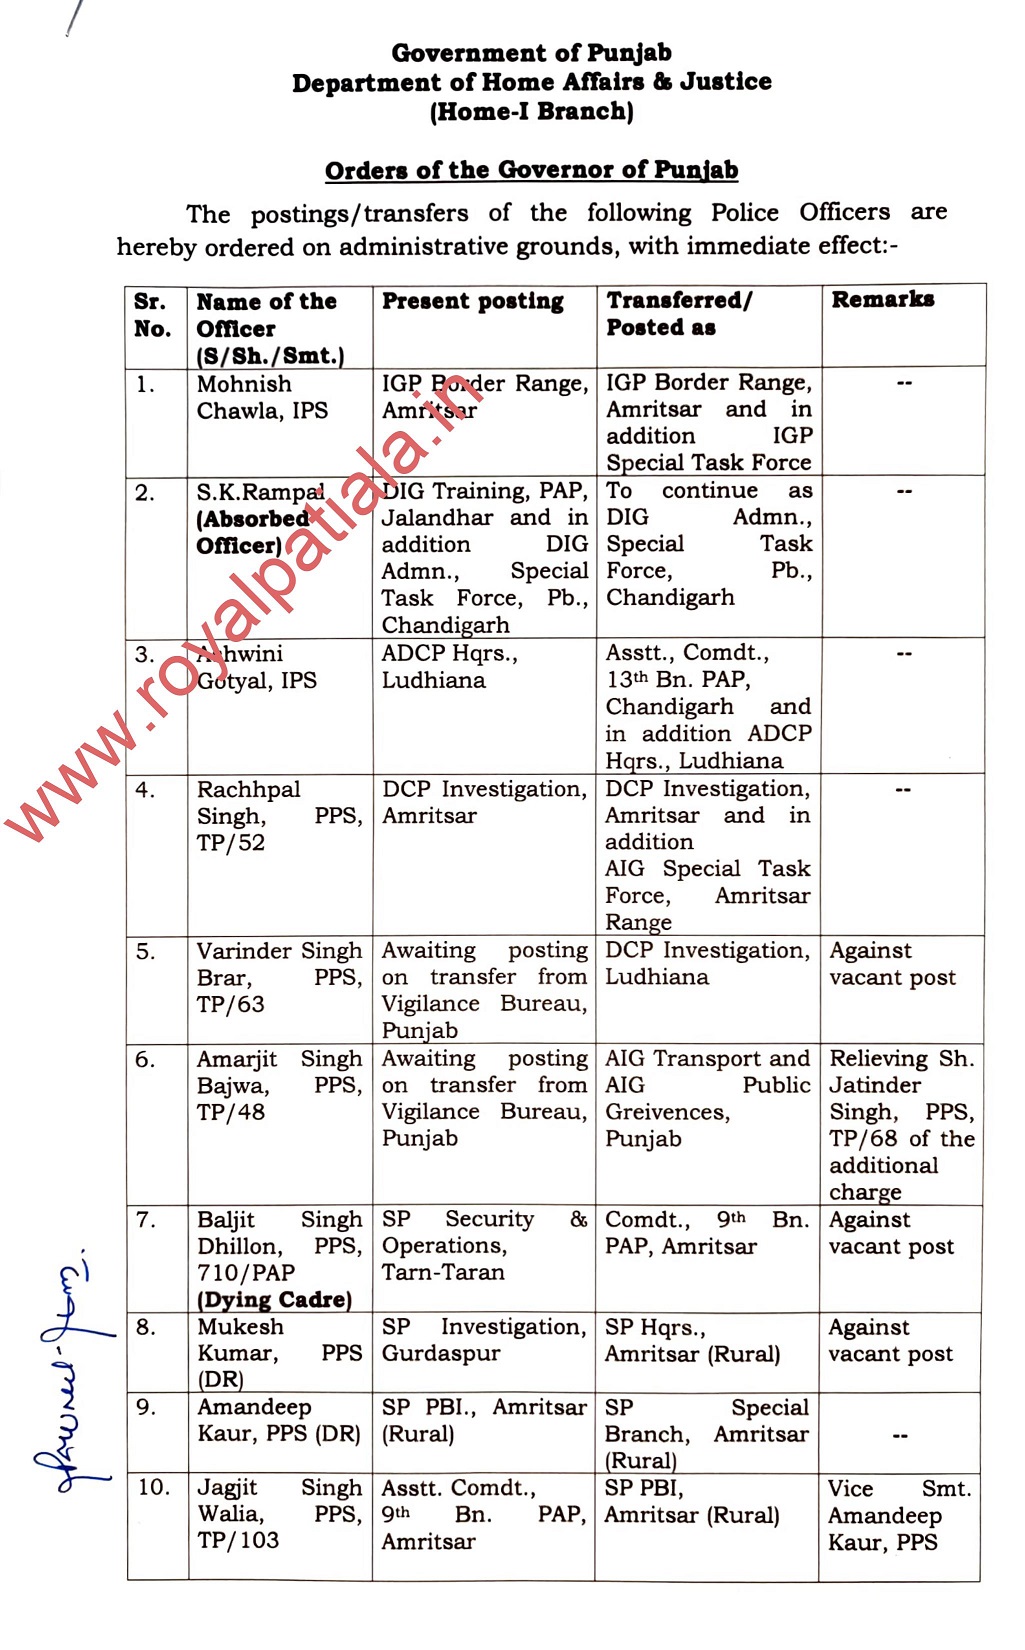 35 IPS-PPS transferred in Punjab